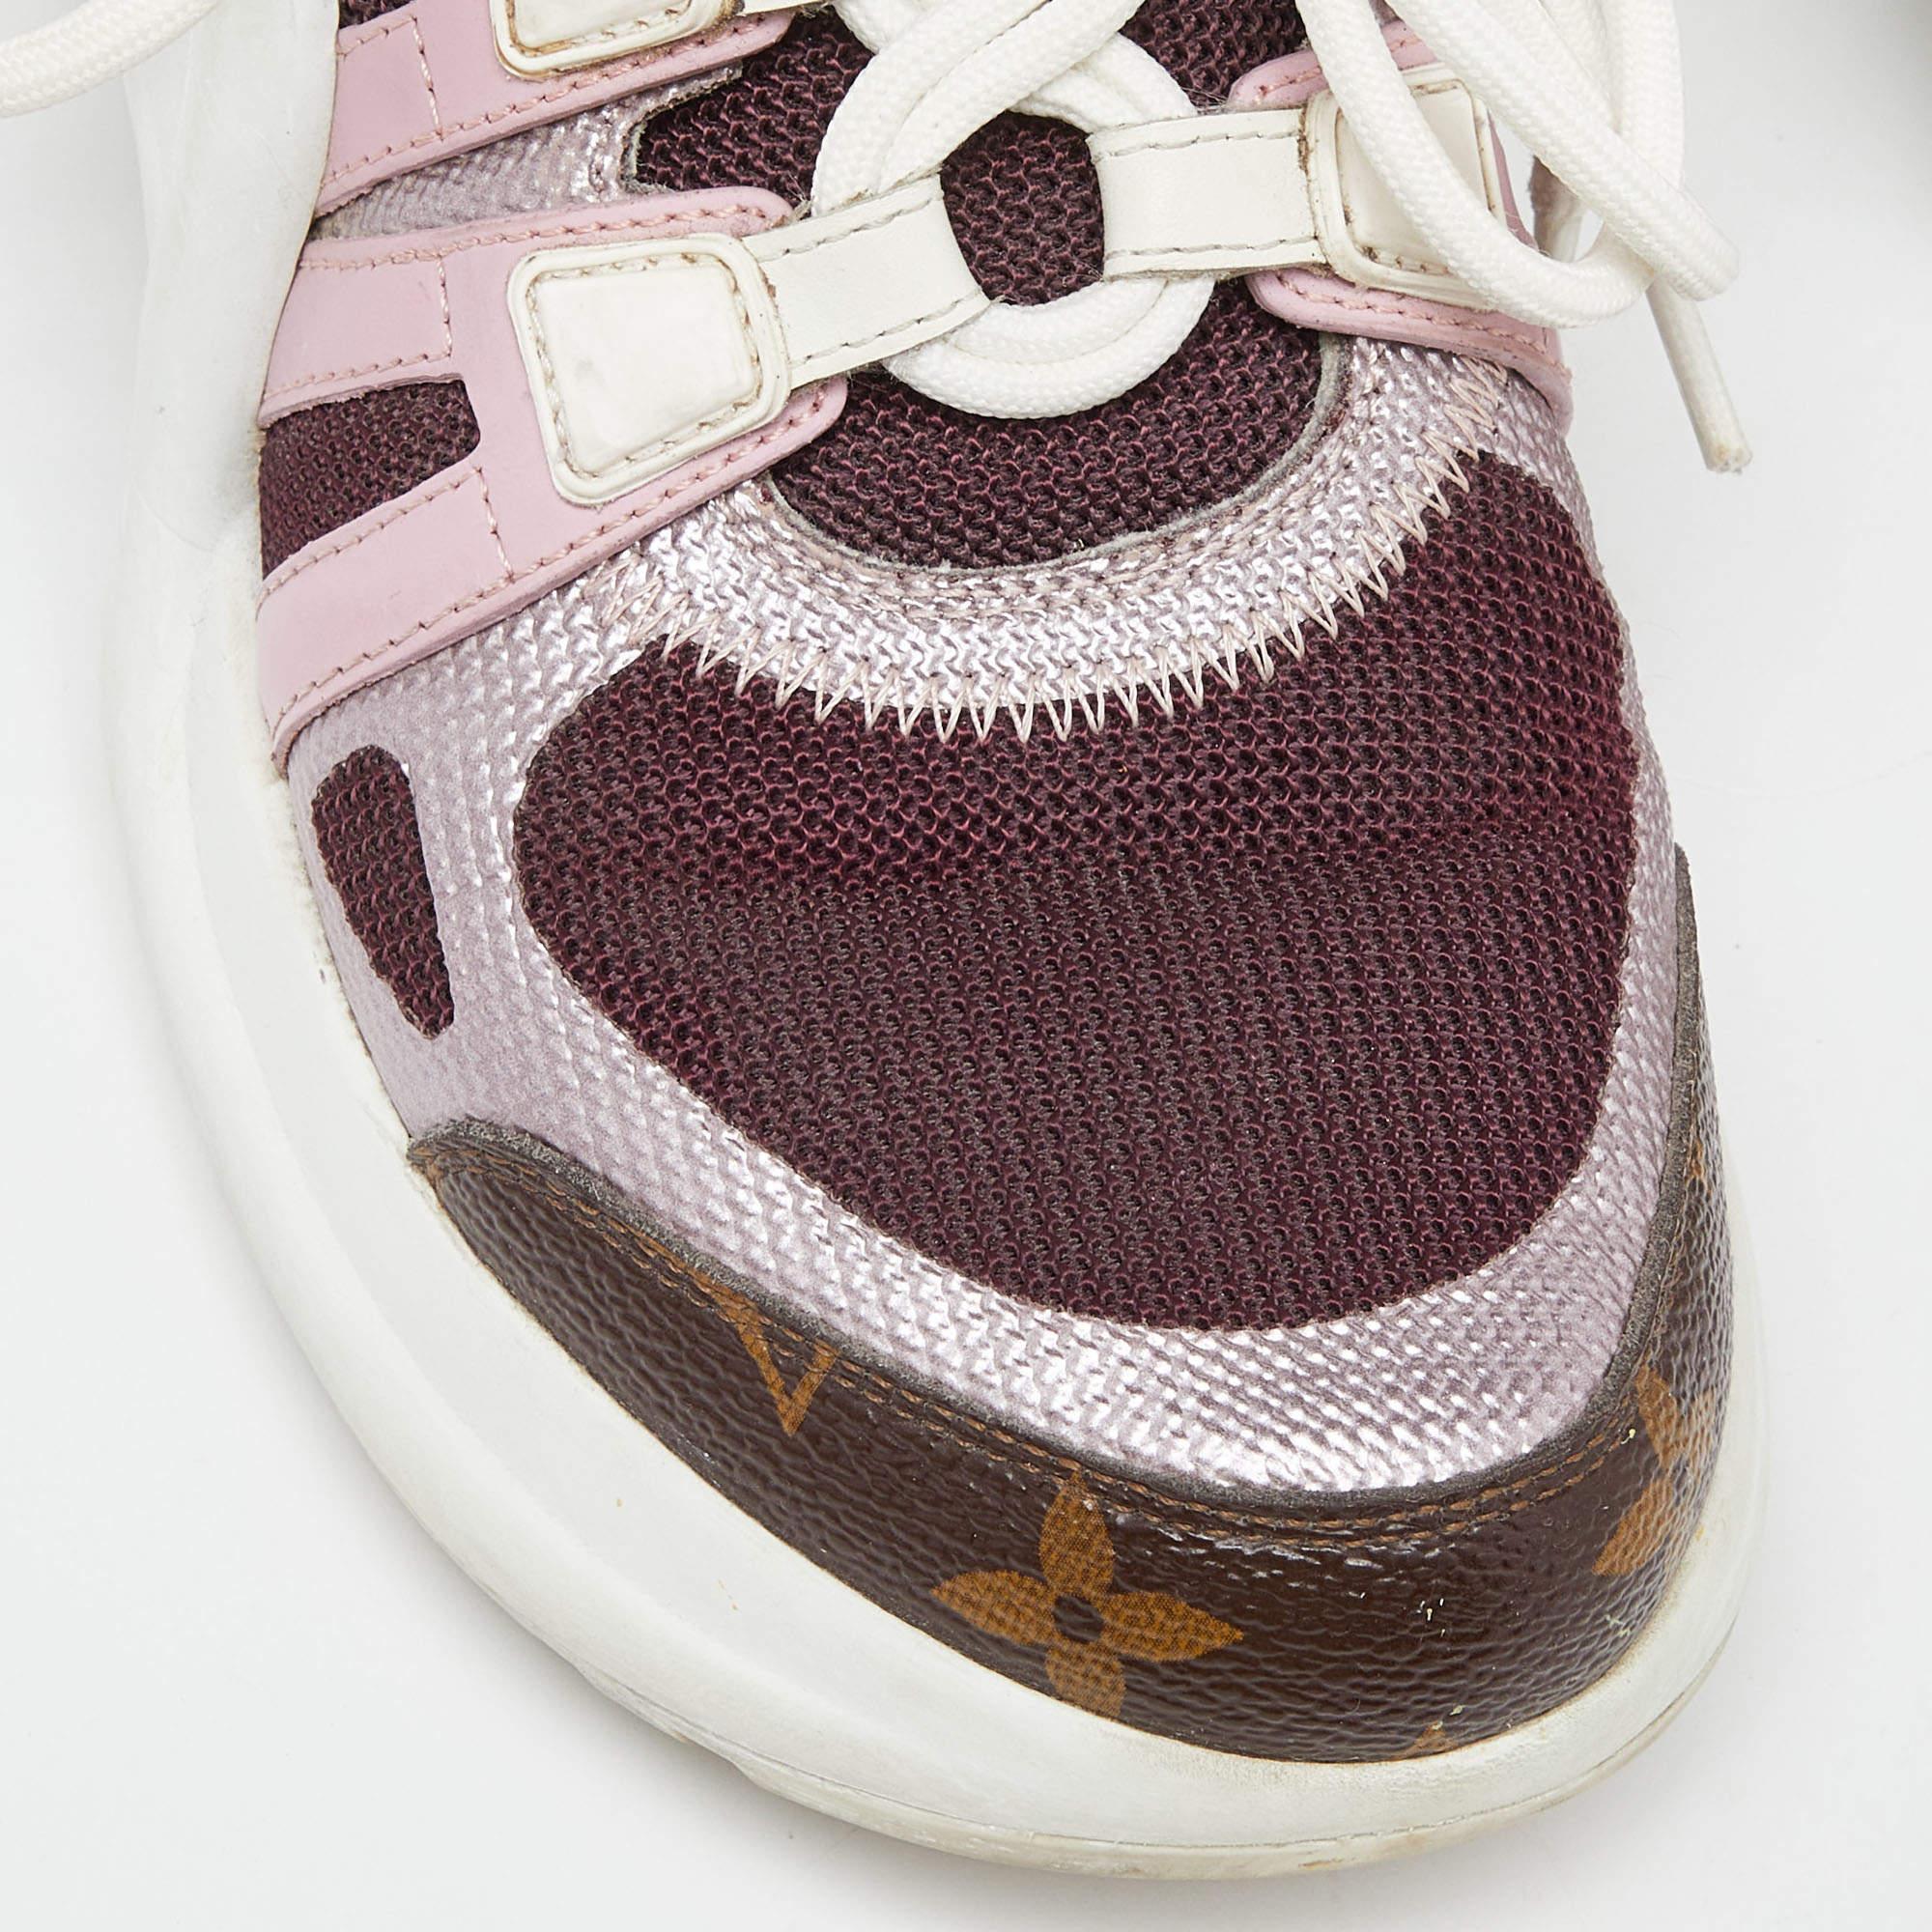 Louis Vuitton Tricolor Leather and Mesh Archlight Sneakers Size 36.5 For Sale 4